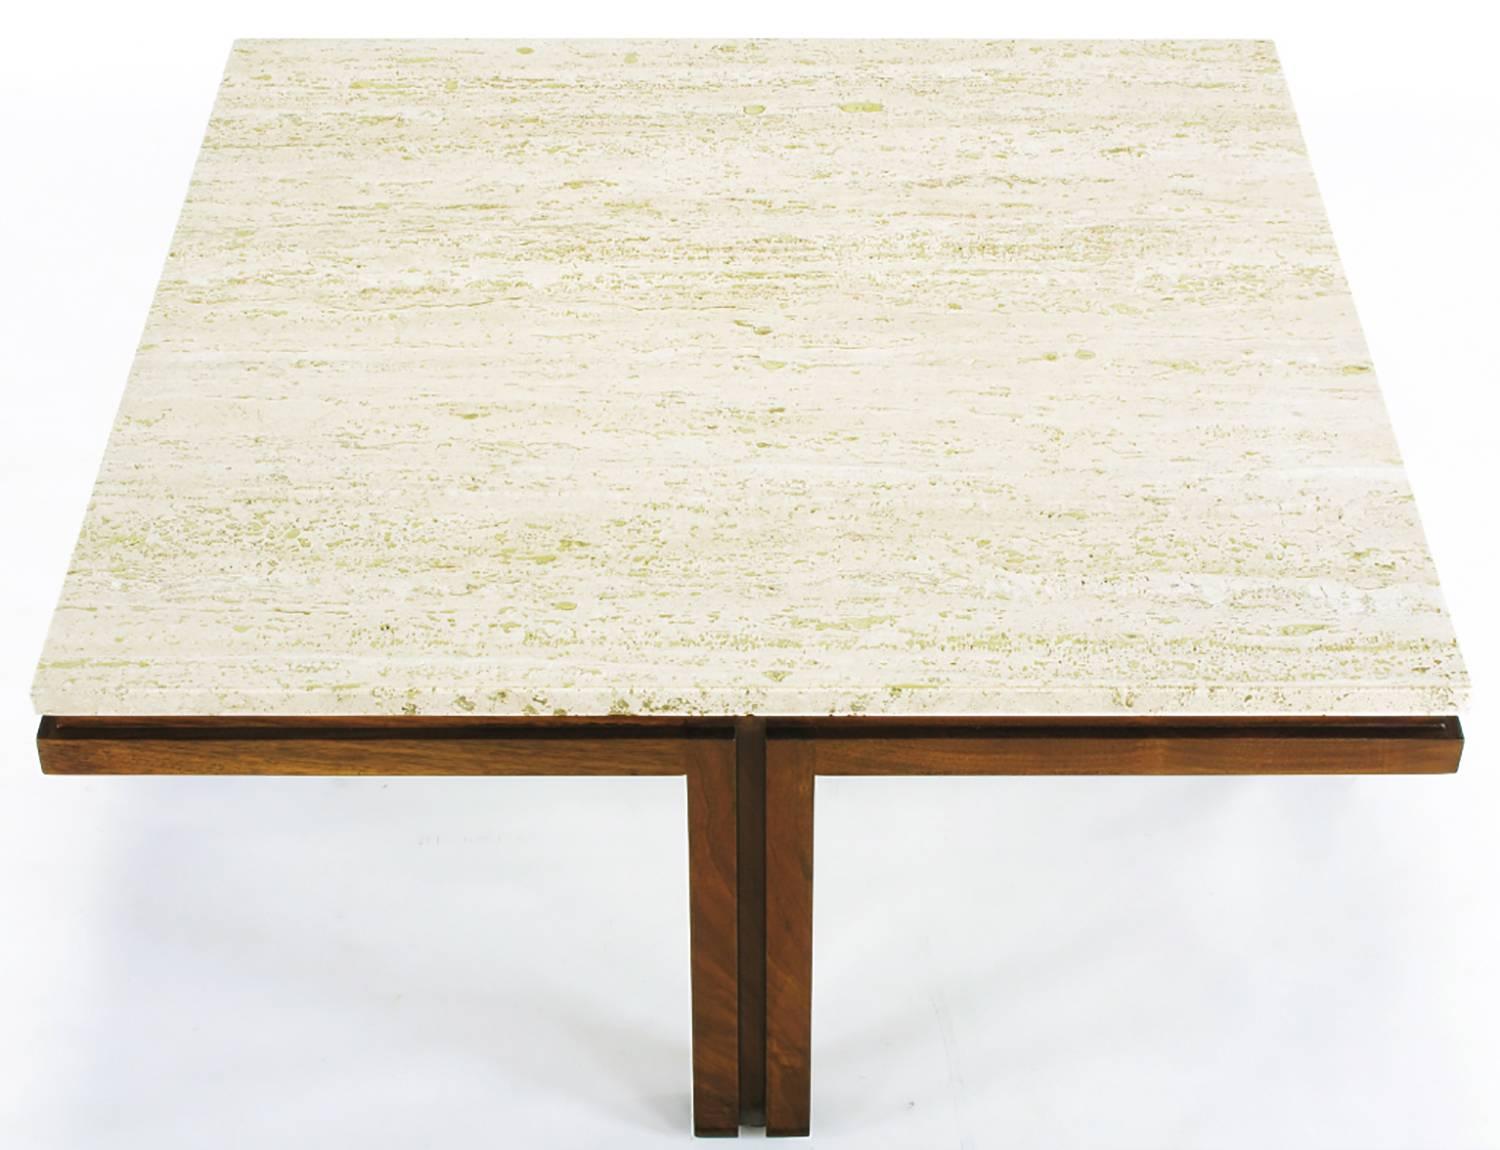 Mid-Century Modern Walnut and Travertine Square Coffee Table with Offset Legs